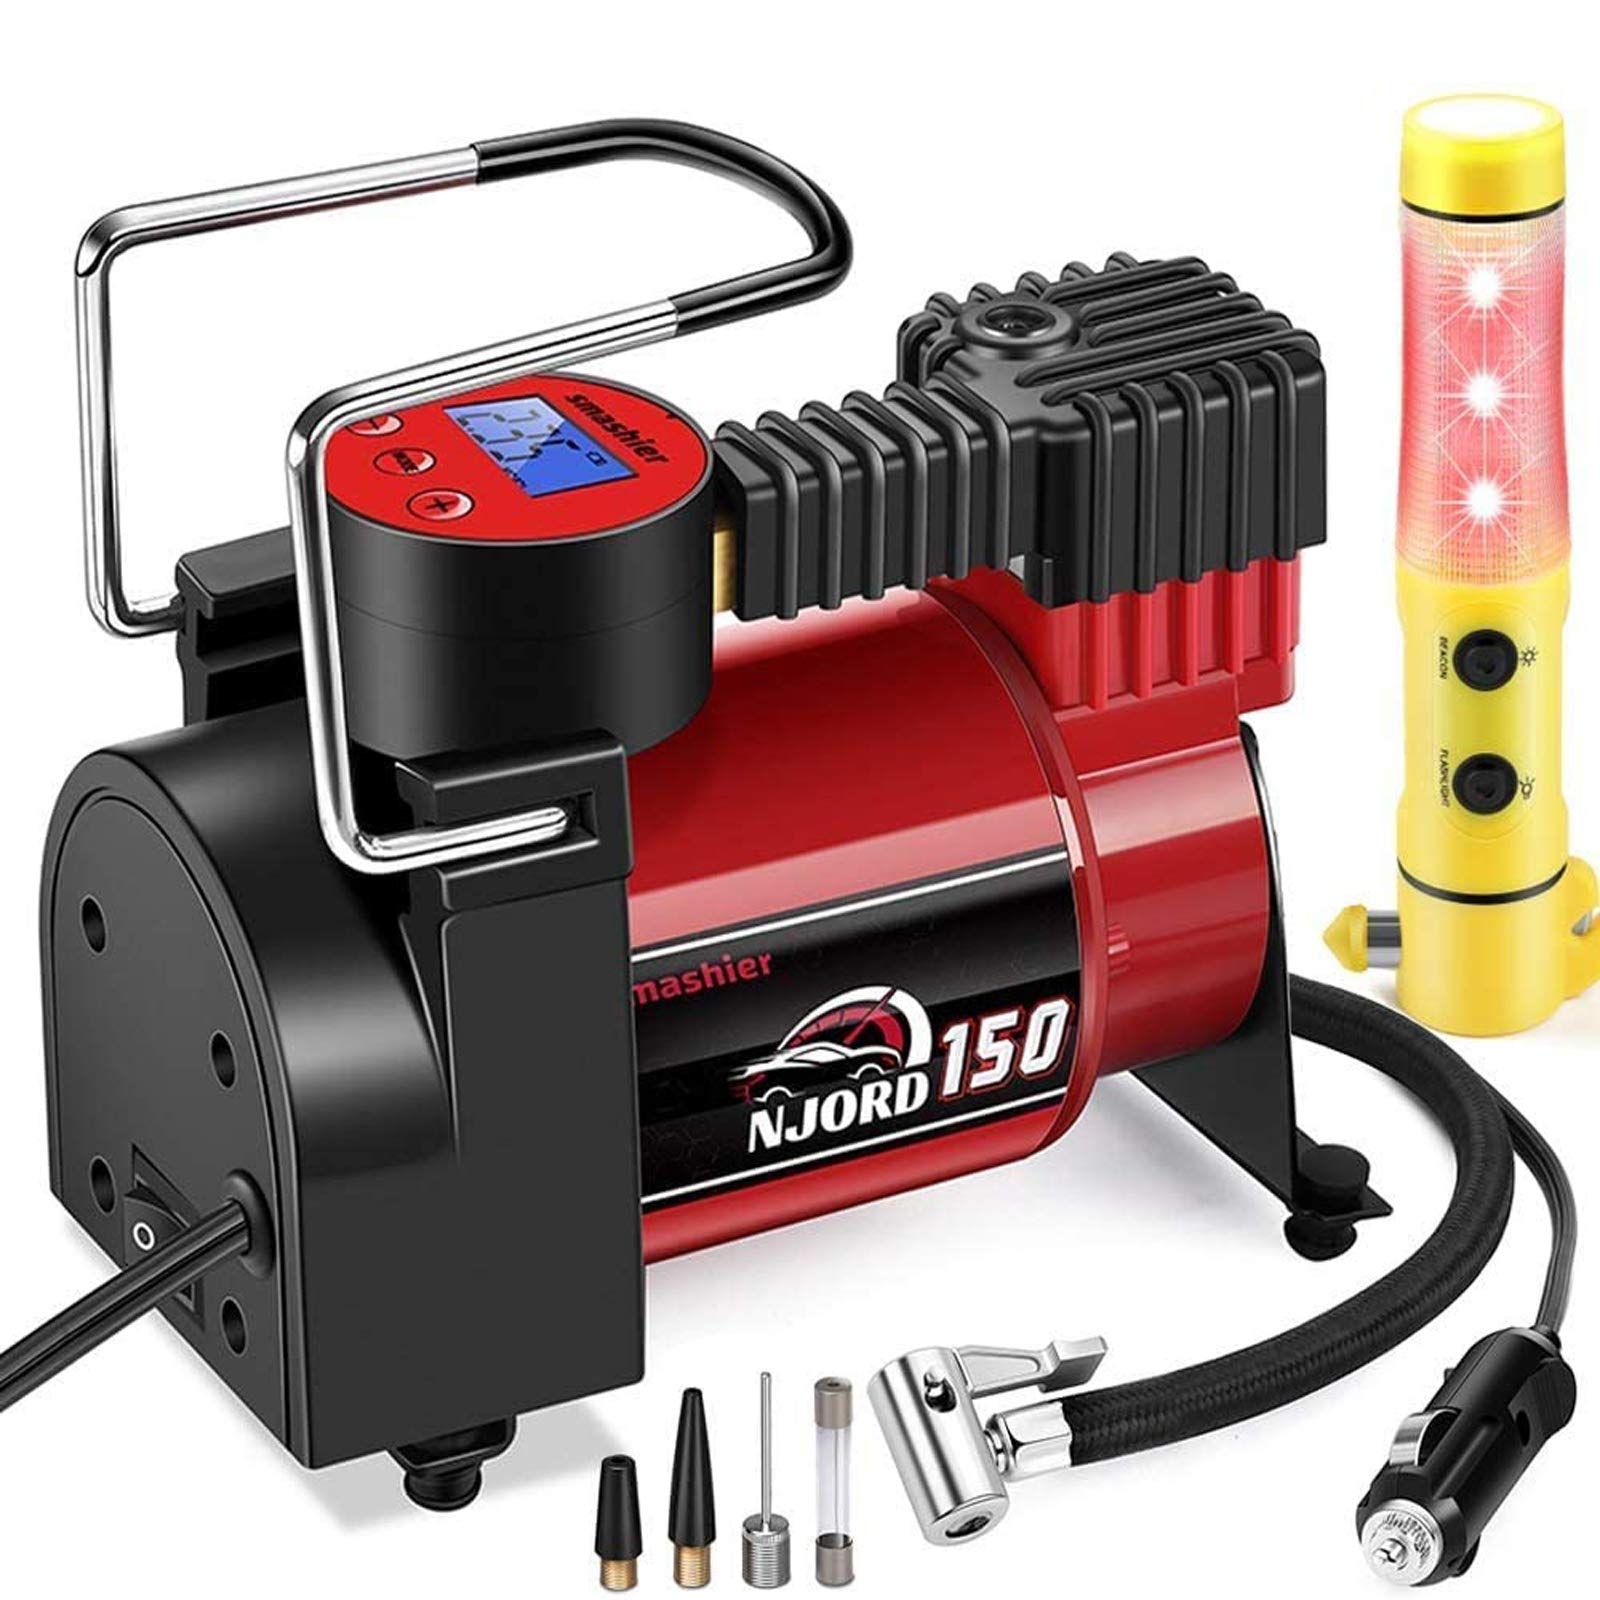 Book Cover Smashier Portable Air Compressor Tire Inflator - 12V DC Digital Pump with Gauge for Car, Motorcycle, Ball, Air Mattress, 12FT Extended Cord, Upgraded Quick Connector, Extra Fuse, Easy & Fast Inflation